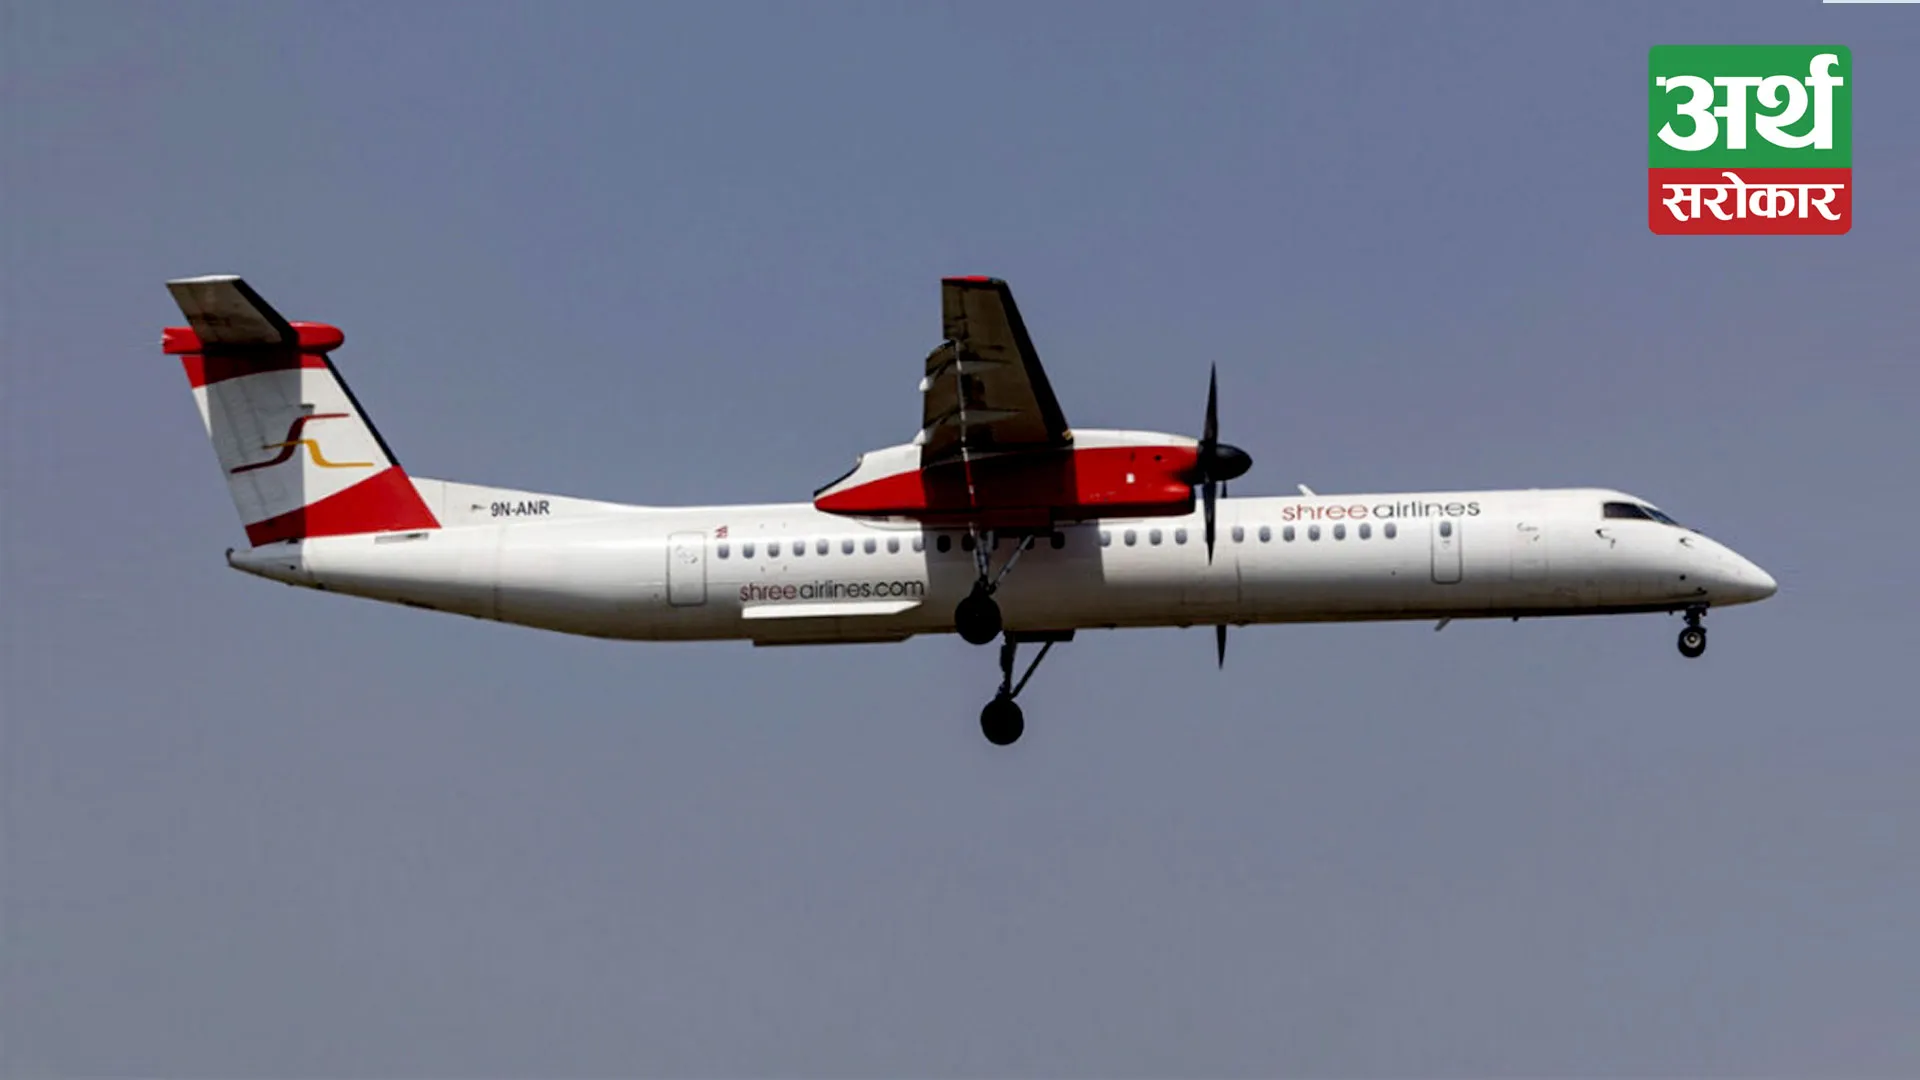 Shree Airline’s Flight to Mountain Flight Makes Emergency Landing Due to Engine Problem